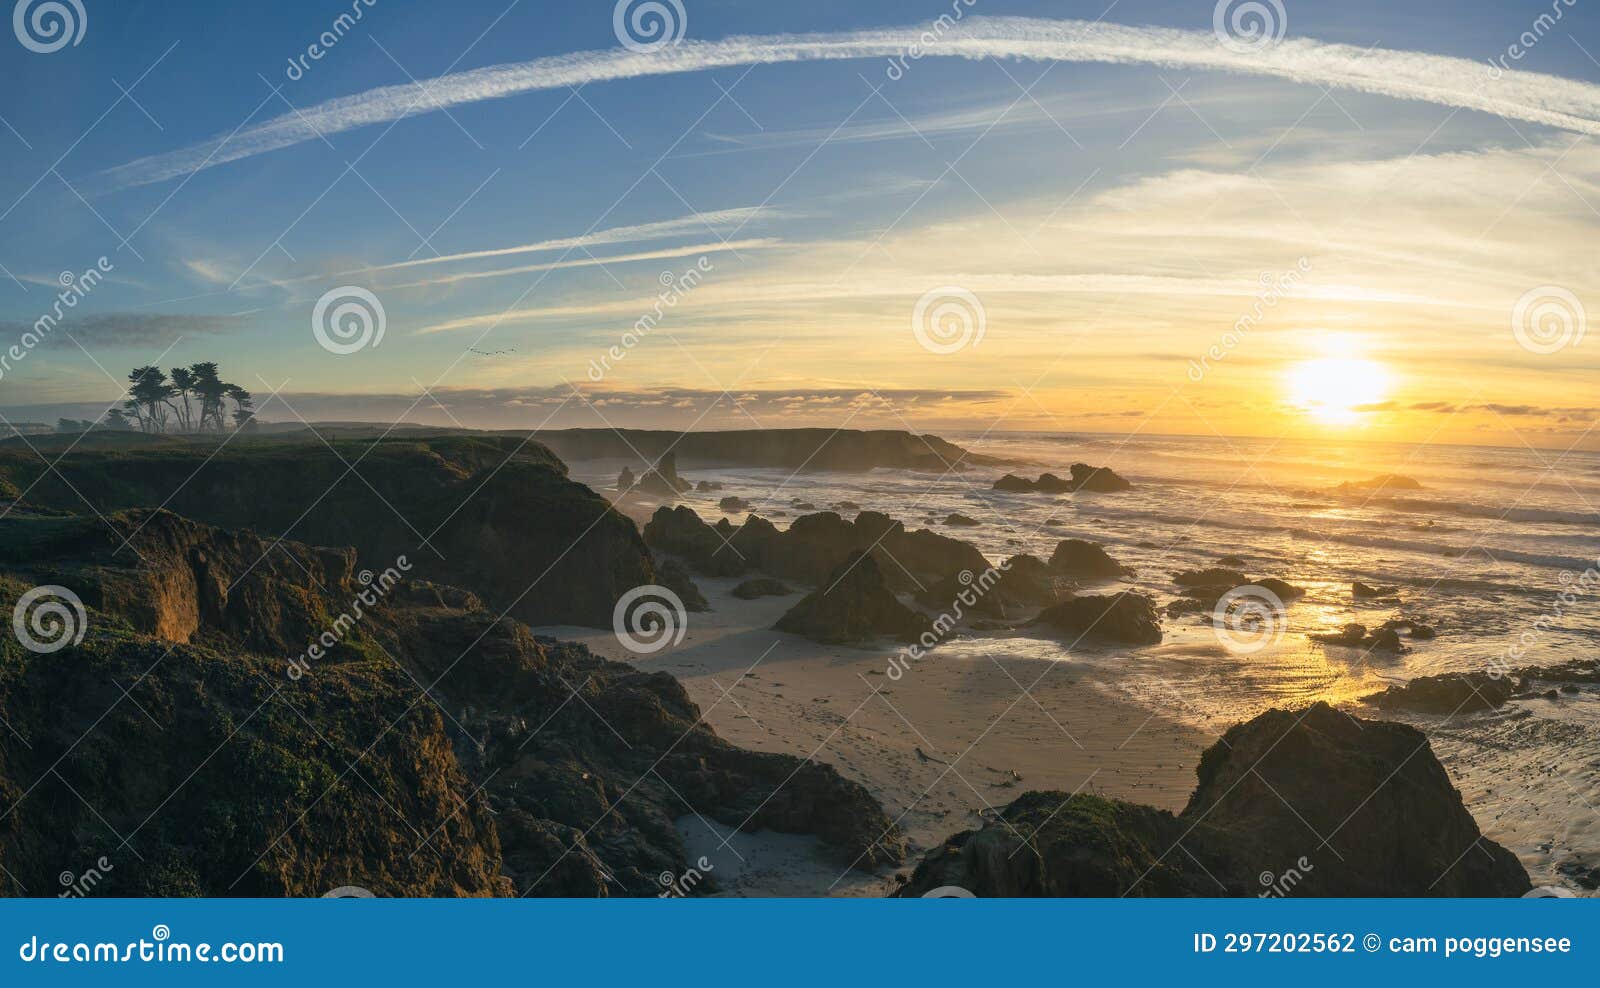 wide angle landscape view of fort bragg coastline as sunset near pudding creek trees